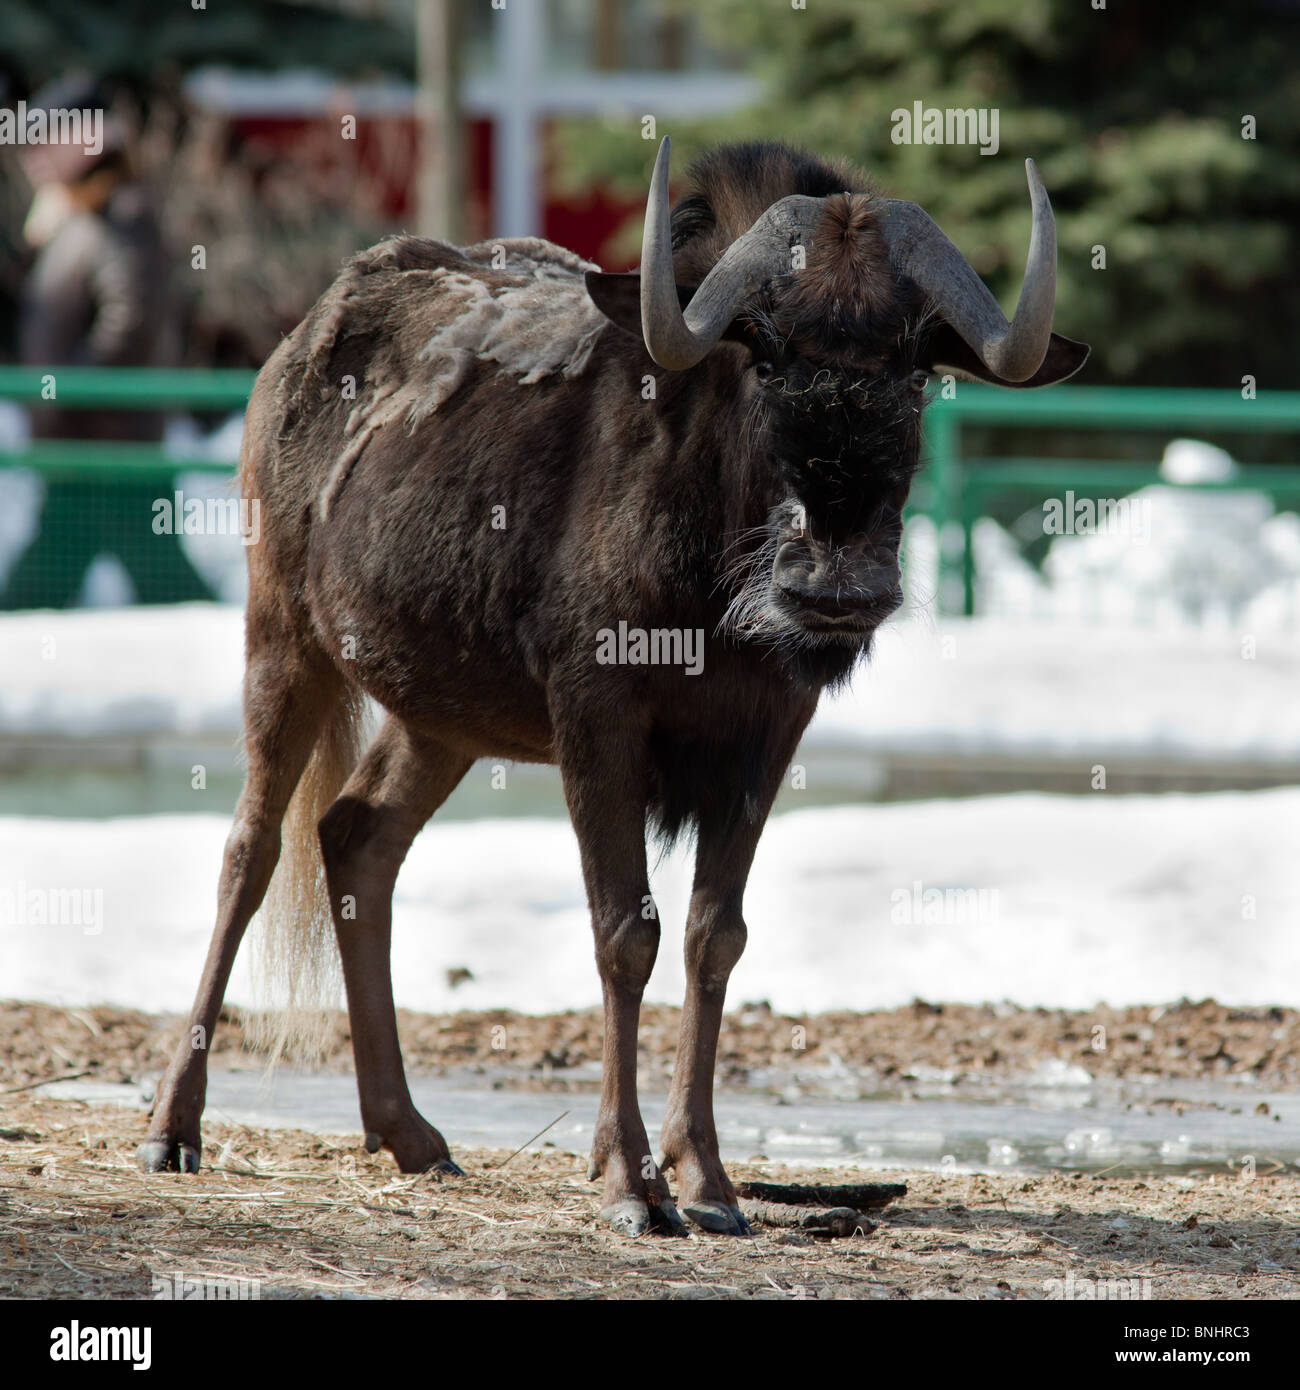 Black Wildebeest, White-tailed gnu, Connochaetes gnou. The animal is in a zoo. Stock Photo